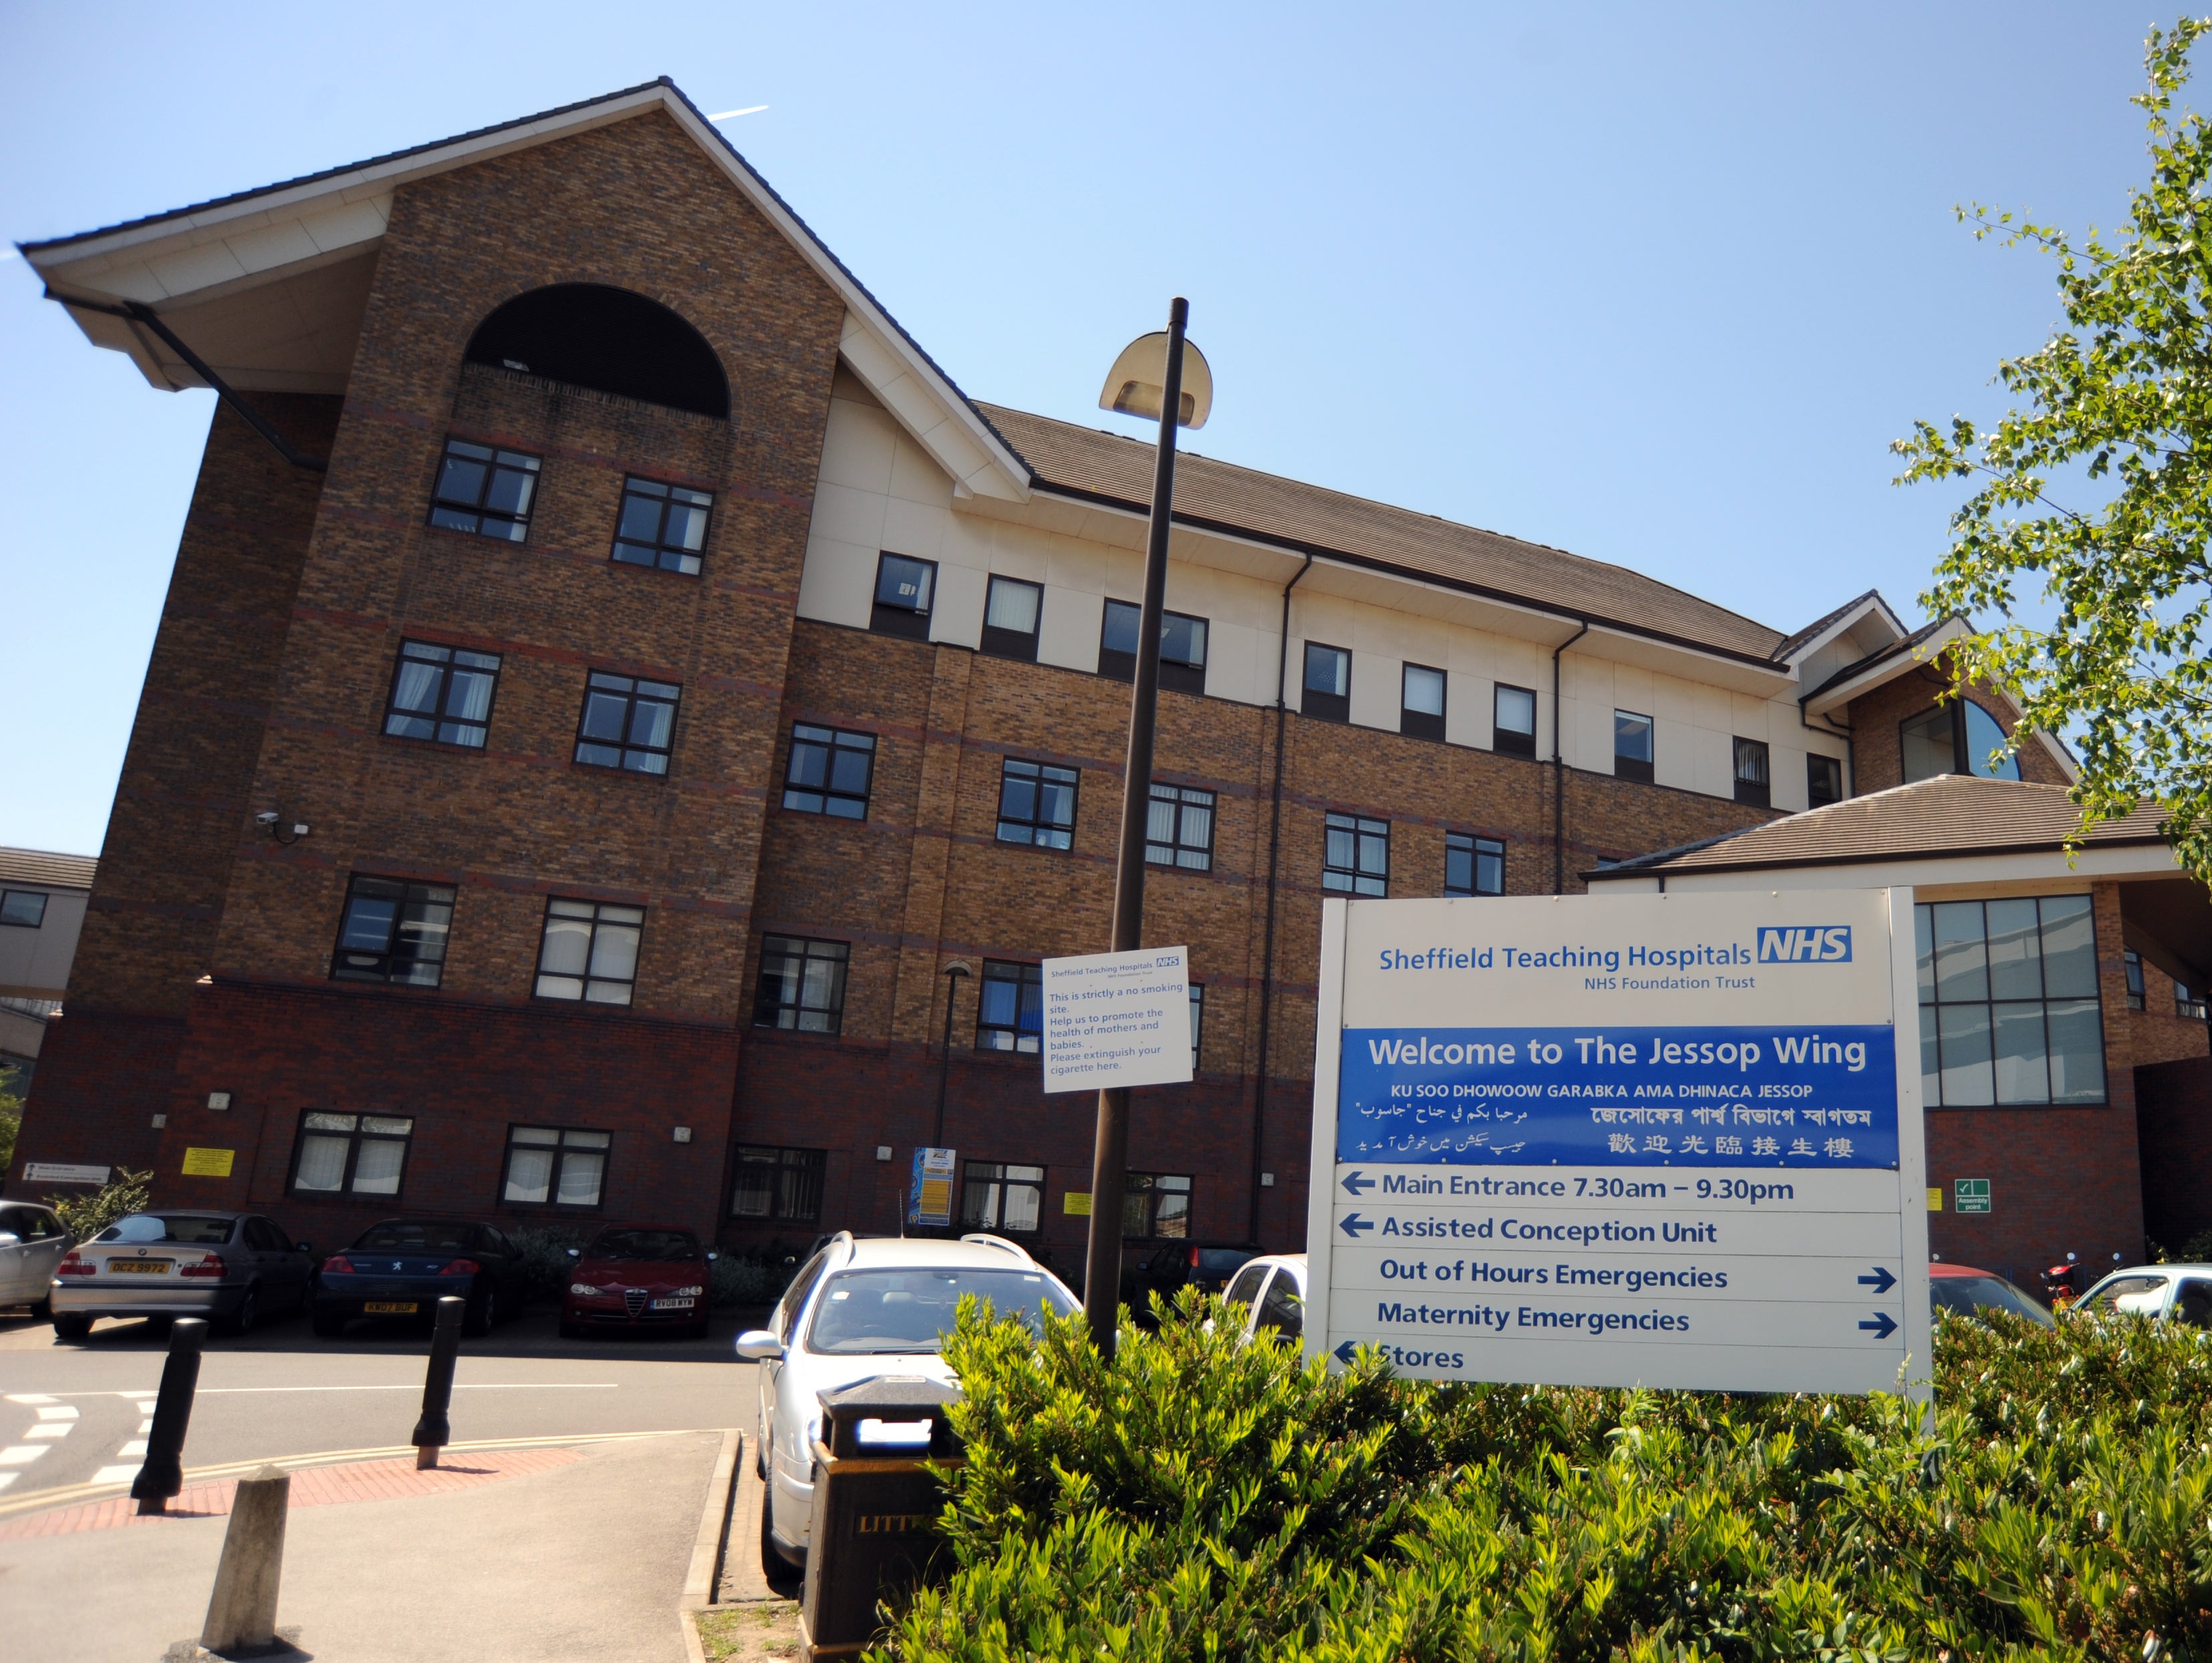 Safety fears have been raised at the Jessop Ward, part of the Sheffield Teaching Hospitals Trust